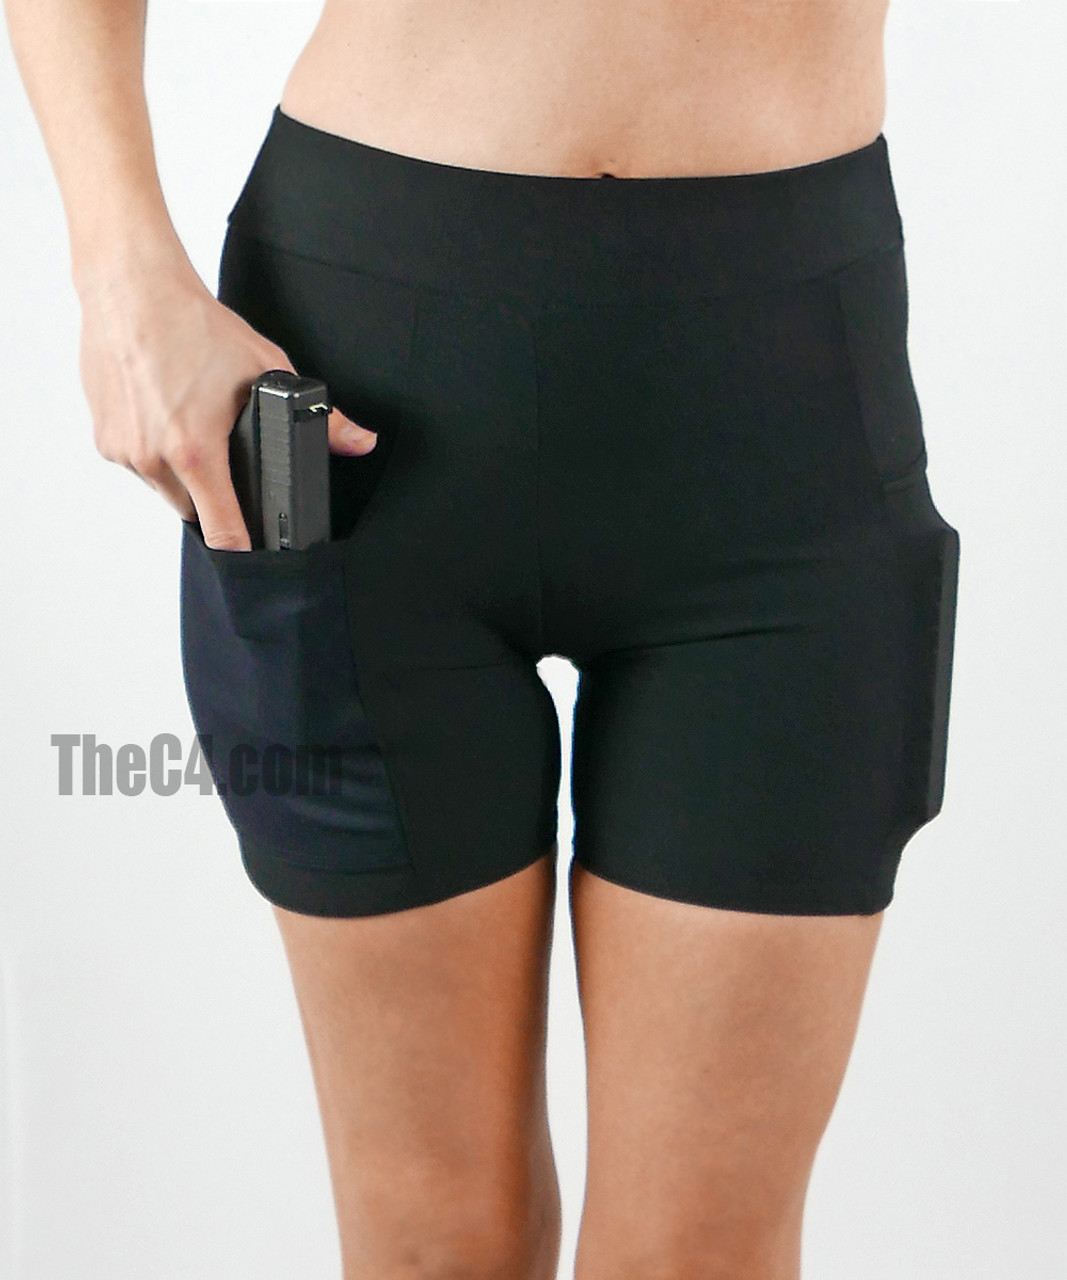 Concealed Carry Shorts - Nude Outer-Thigh Holstering